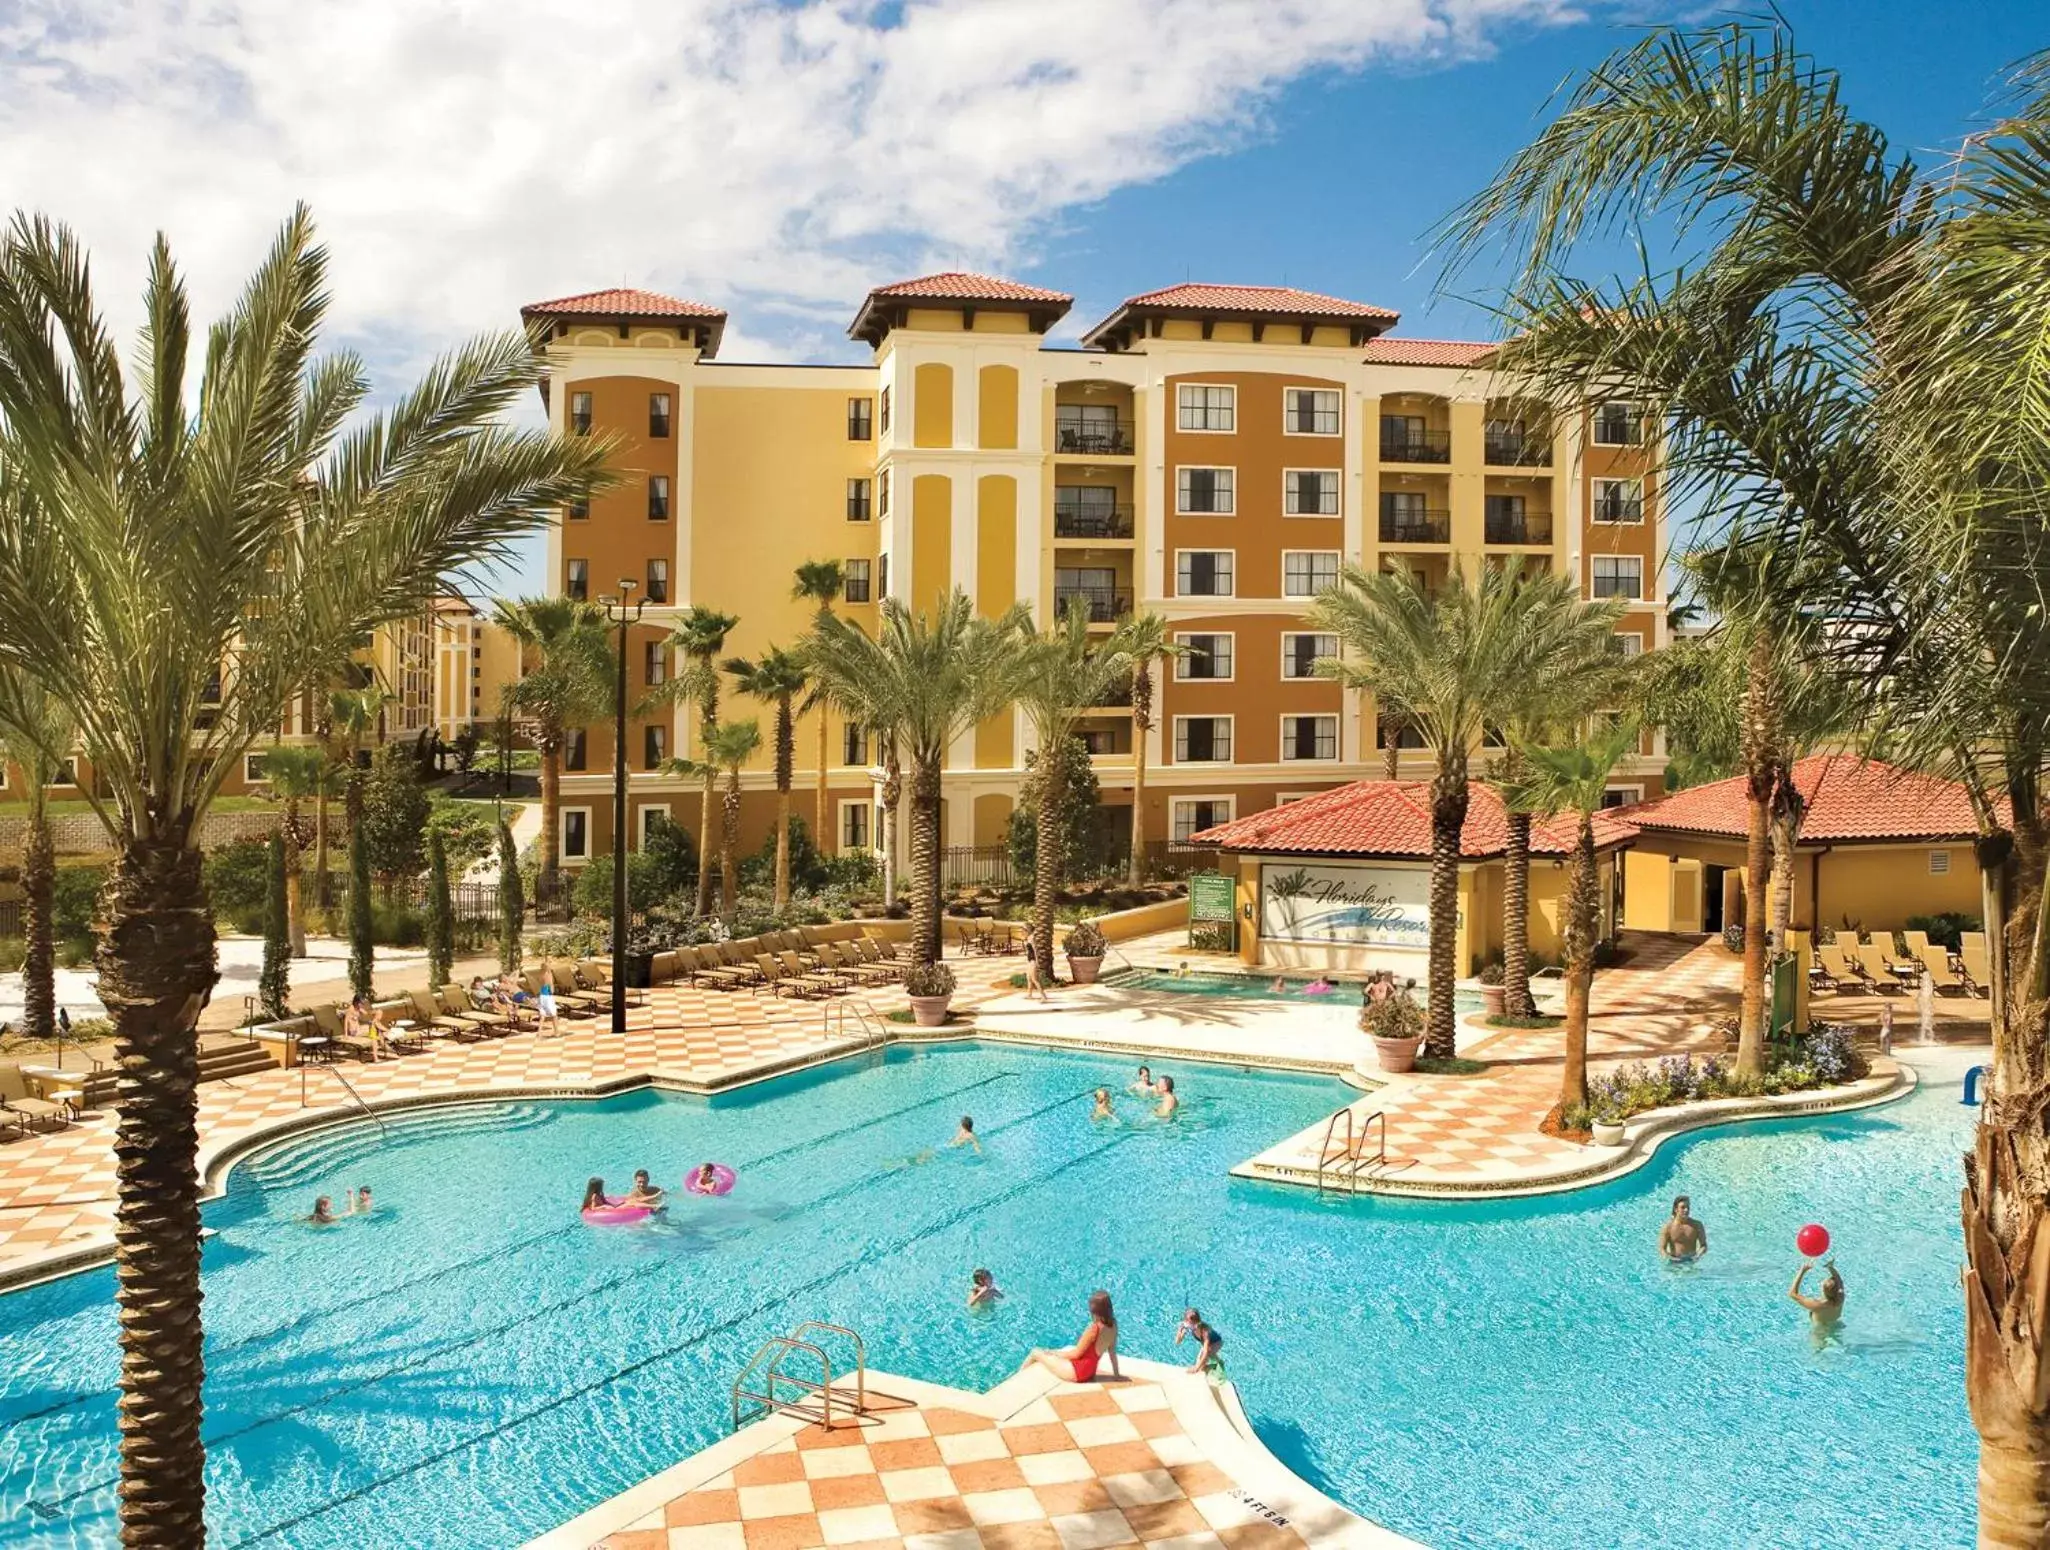 Property building, Swimming Pool in Floridays Orlando Two & Three Bed Rooms Condo Resort